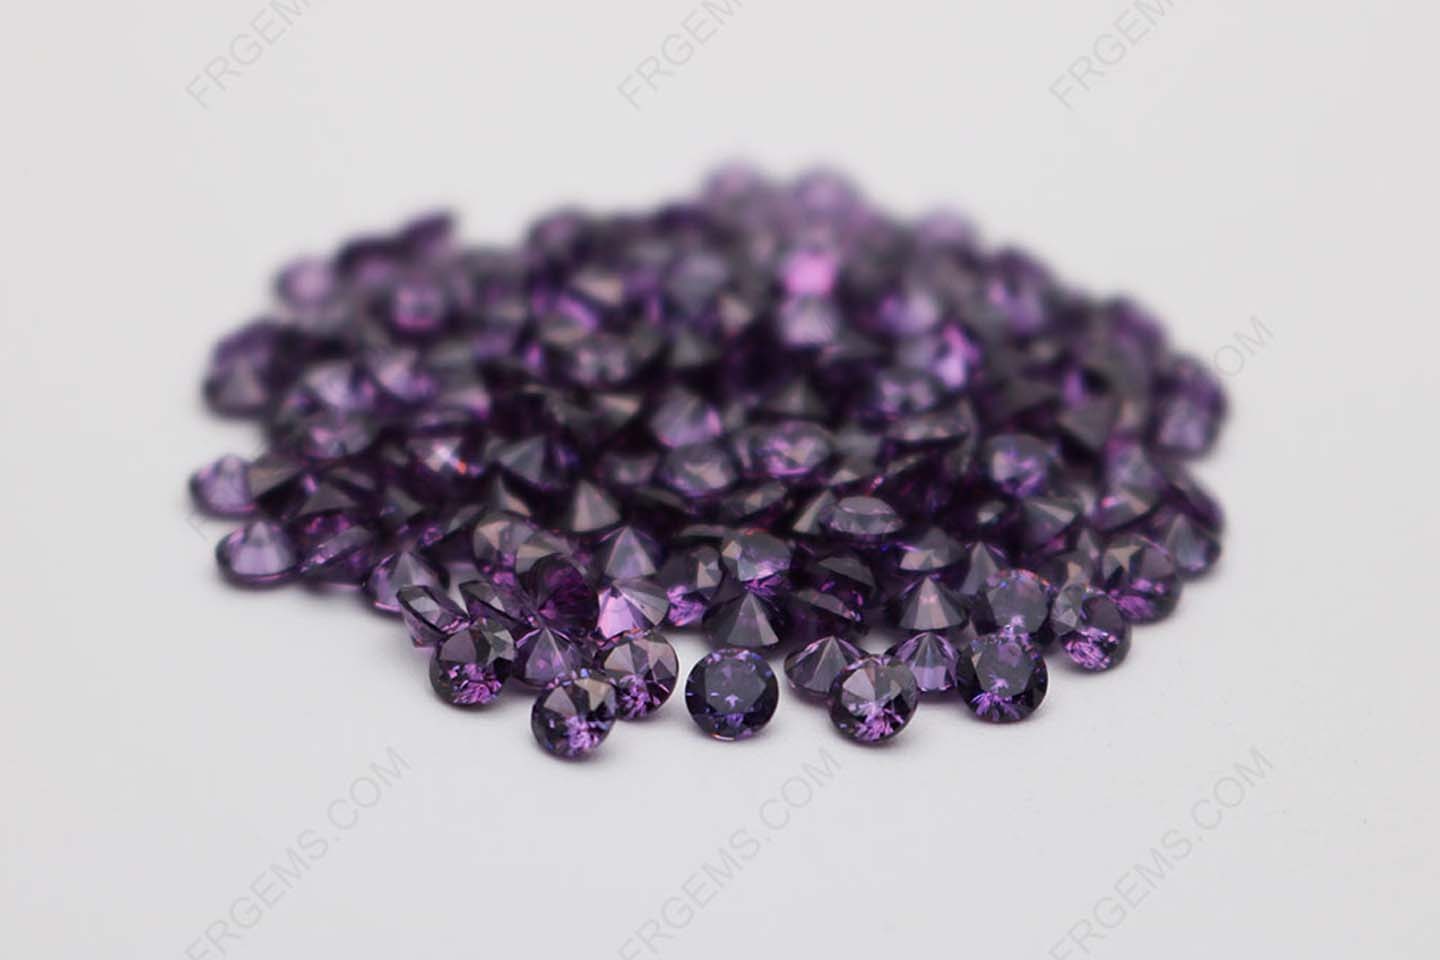 Cubic Zirconia Amethyst Color Round Shape faceted cut 5mm stones CZ10 IMG_0342